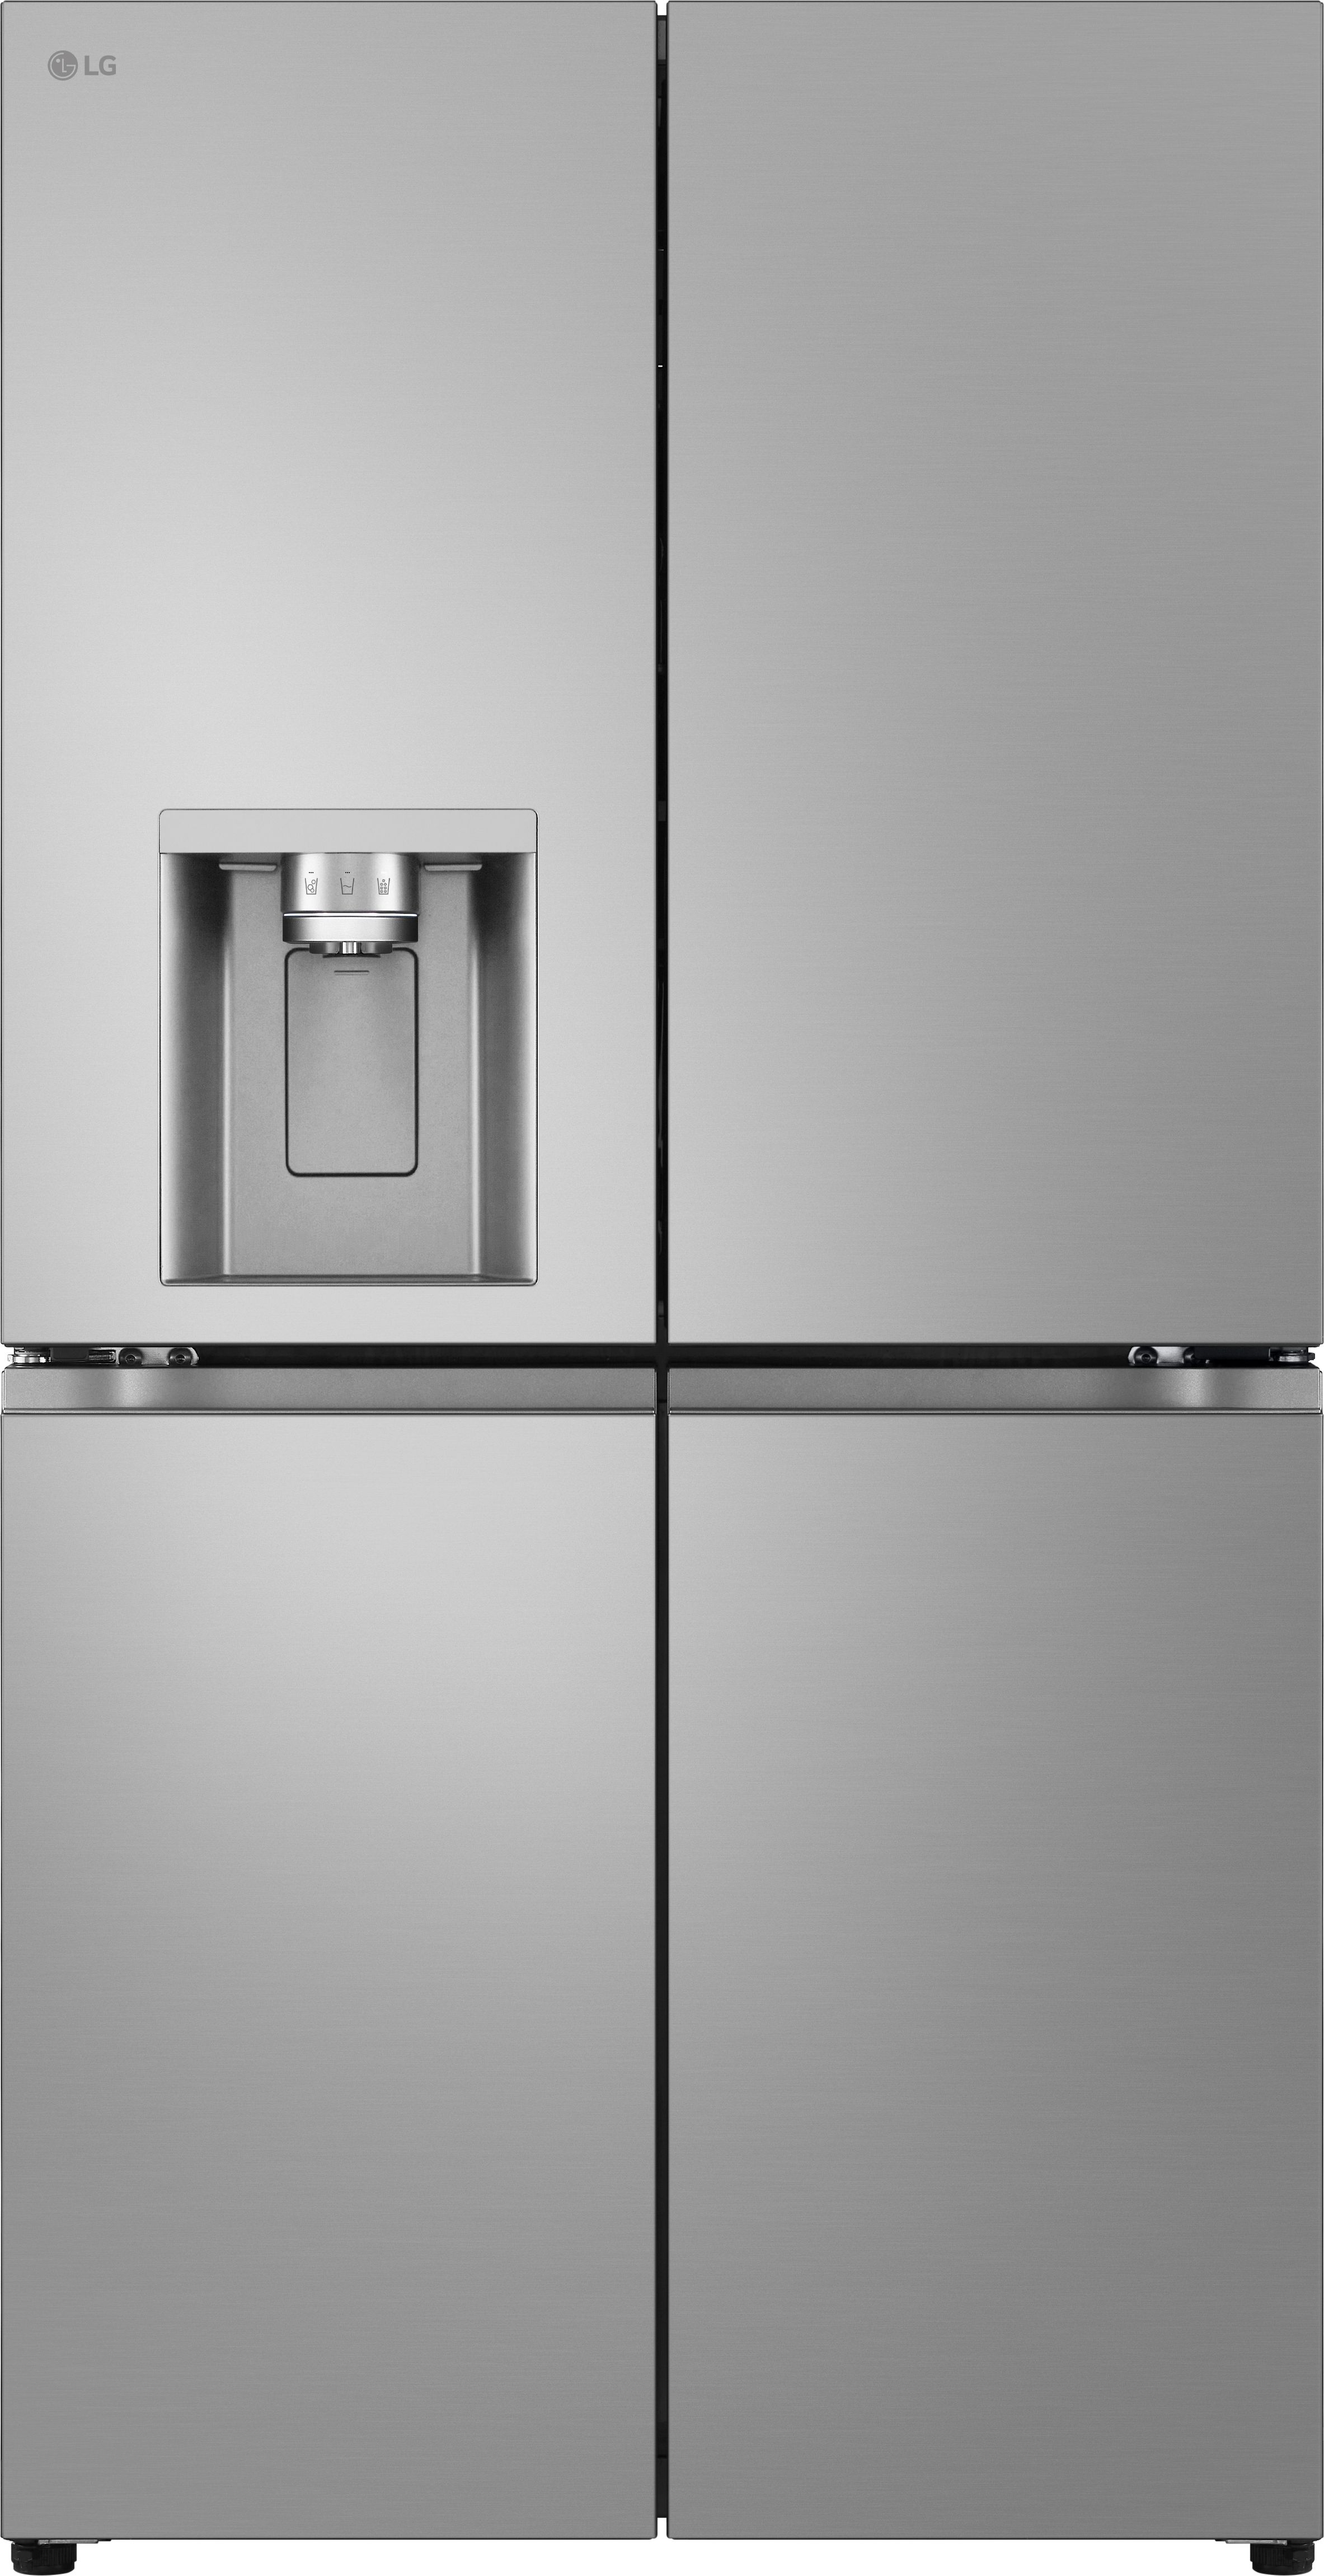 LG NatureFRESH GML960PYFE Wifi Connected Plumbed Frost Free American Fridge Freezer - Prime Silver - E Rated, Silver